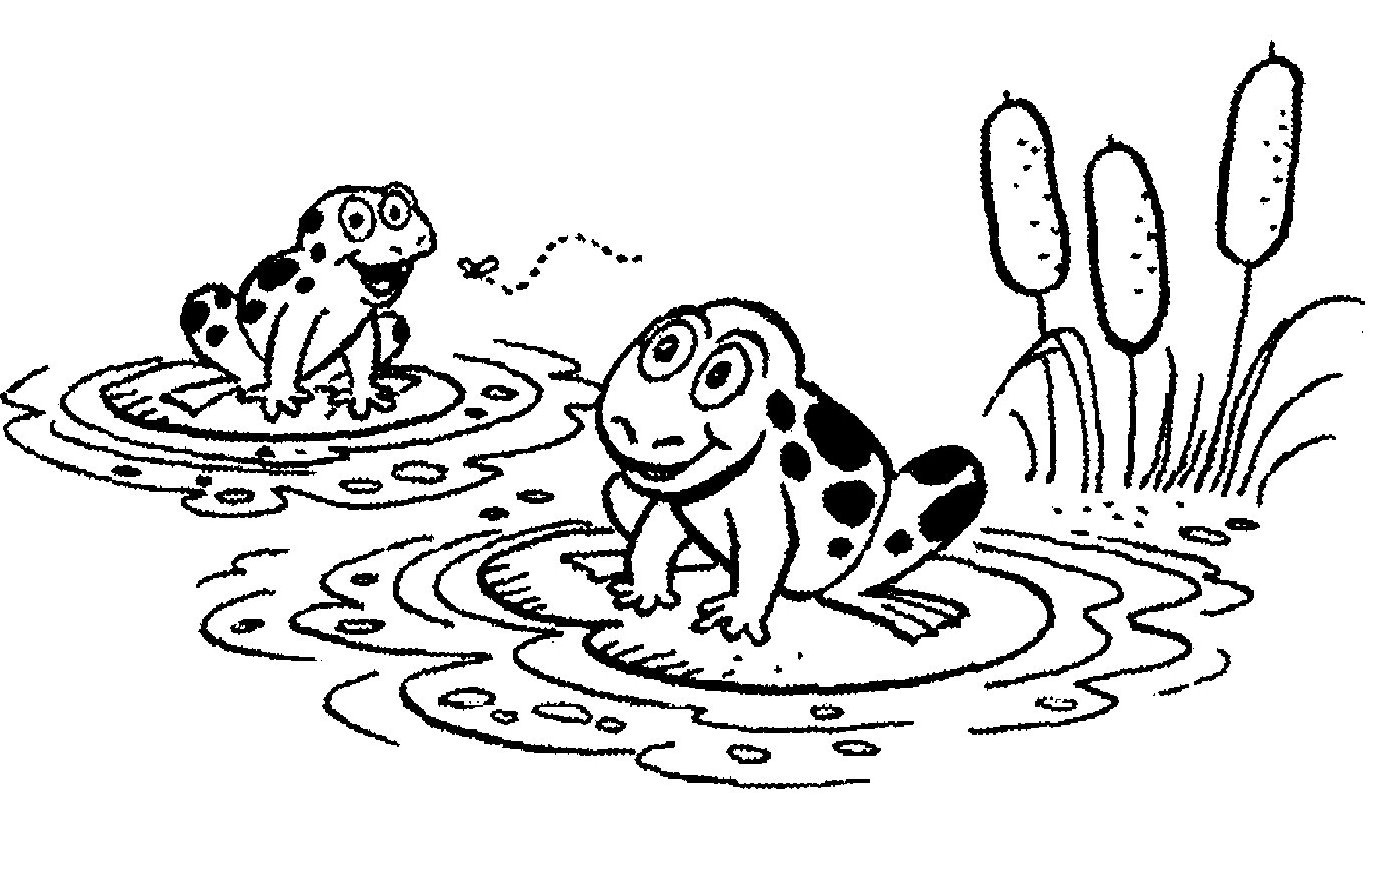 Pond clipart black and white